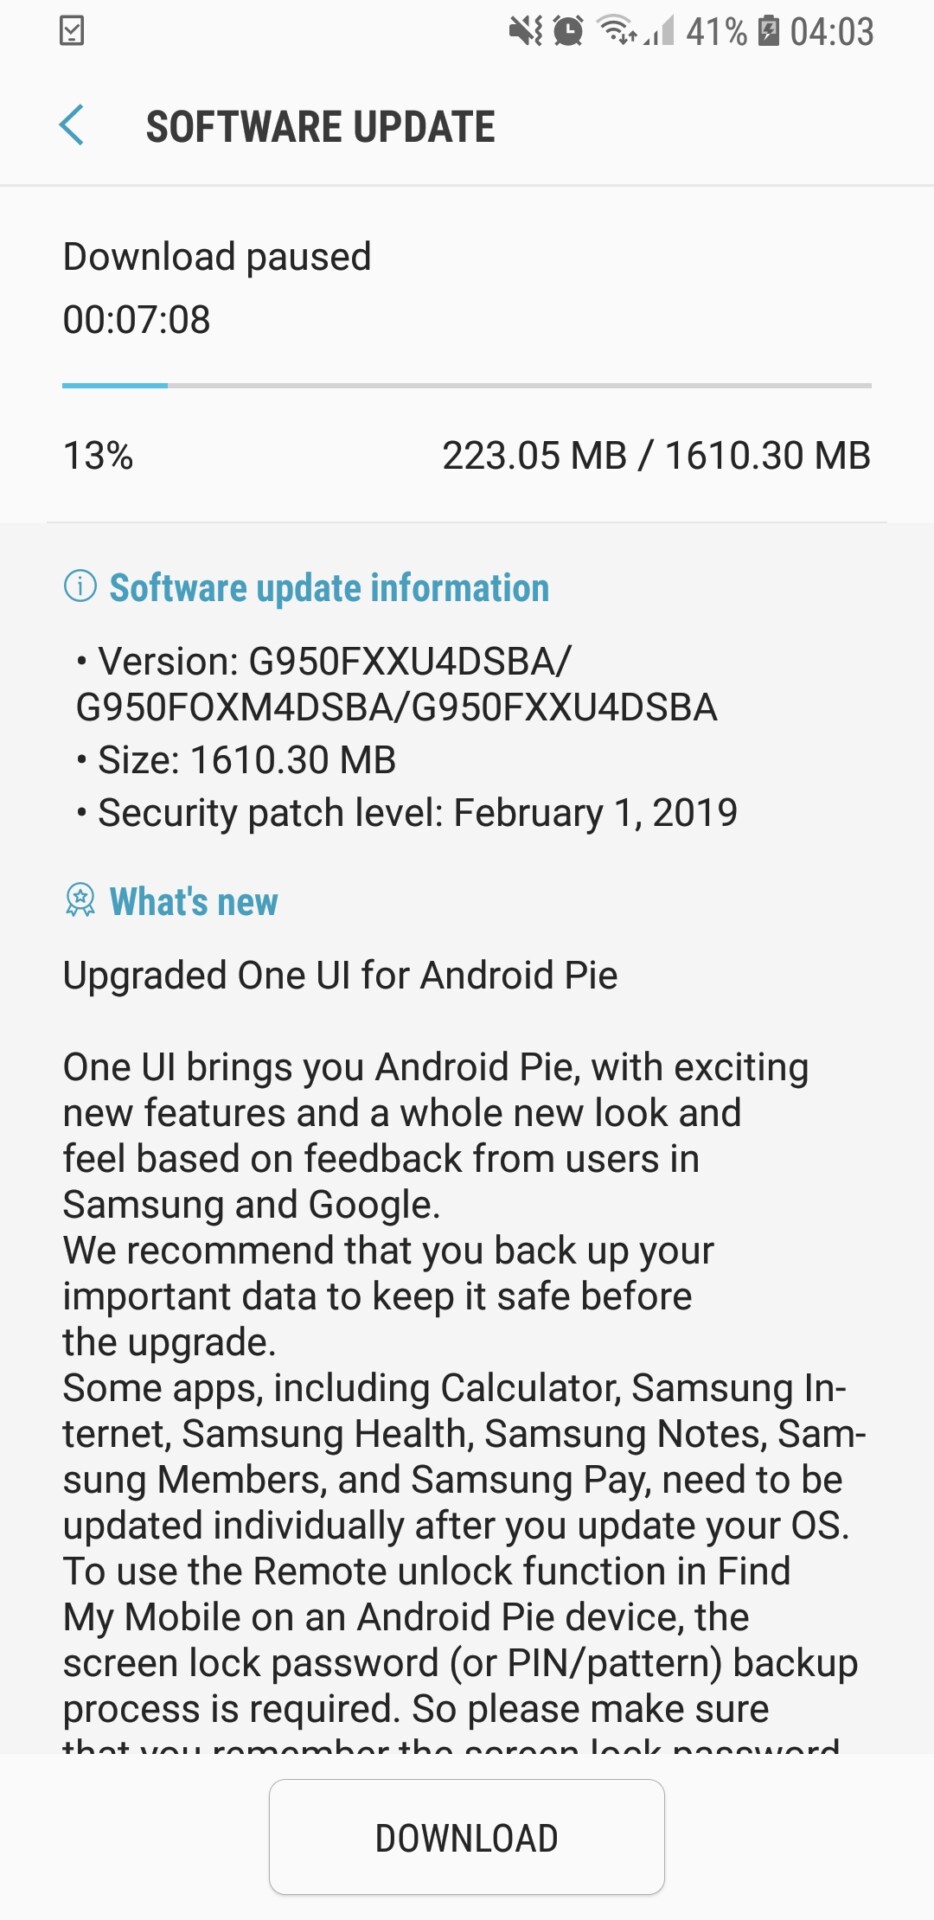 Android Pie on the Samsung Galaxy S8.